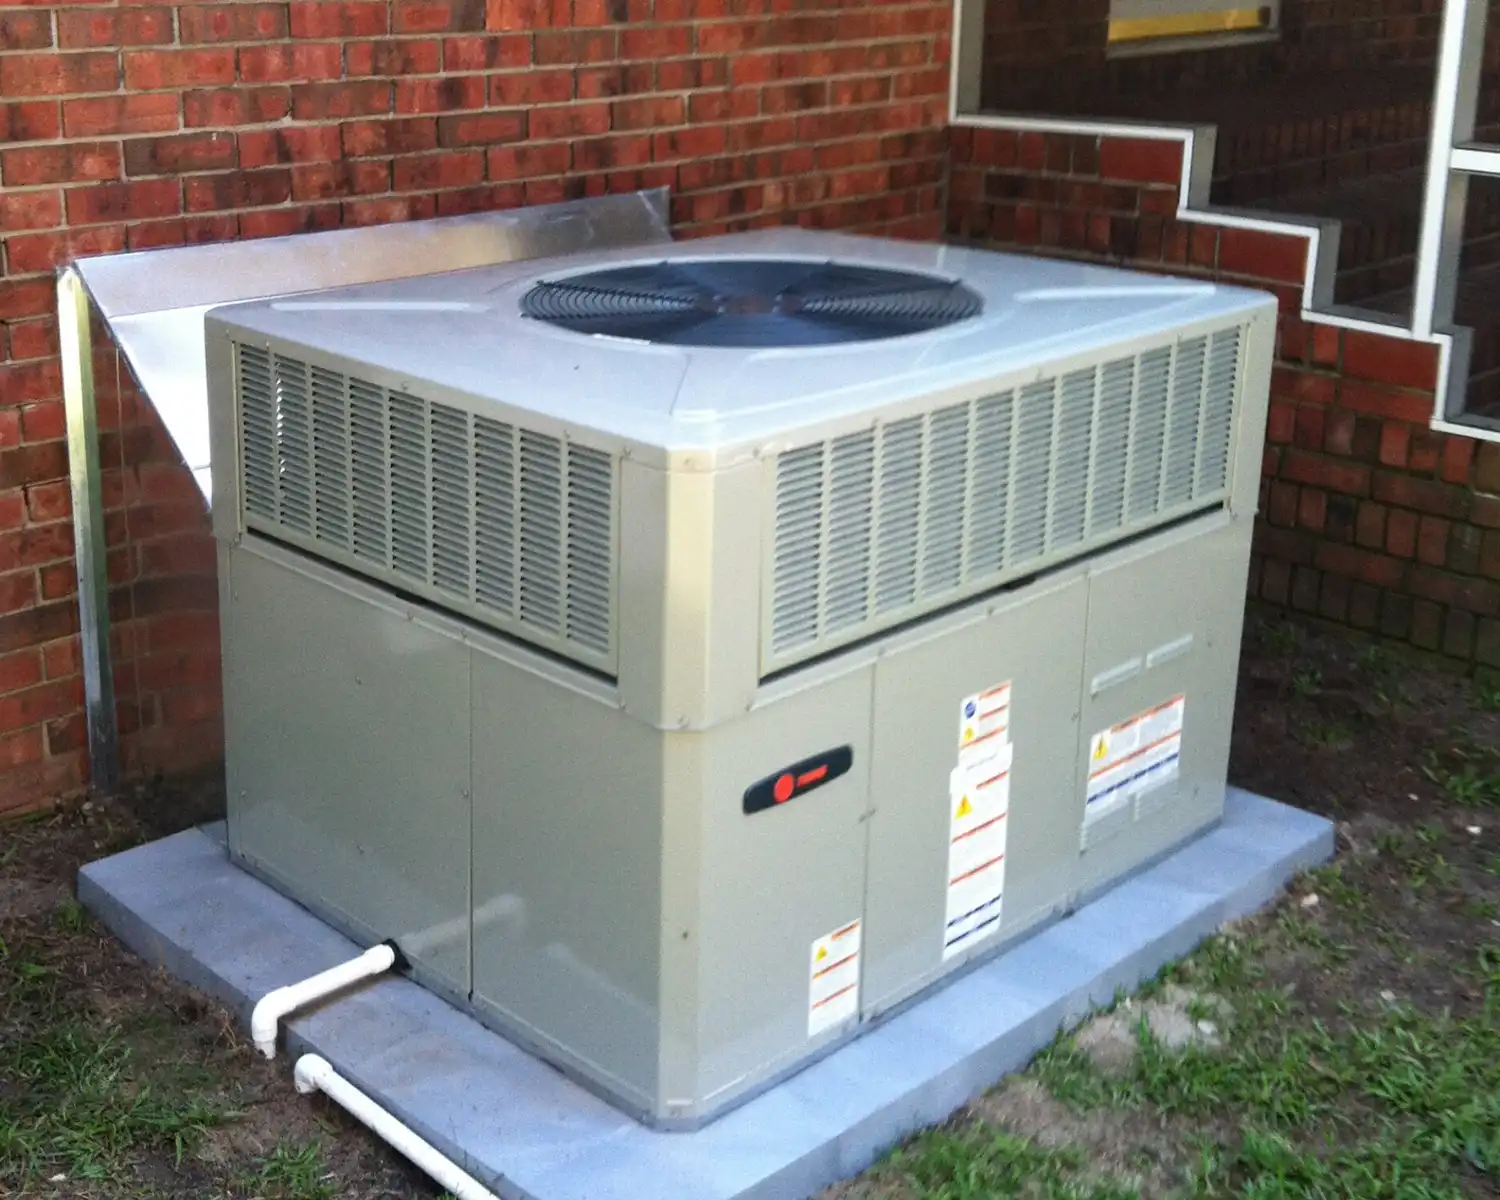 Blythewood Heating & Air Conditioning 07